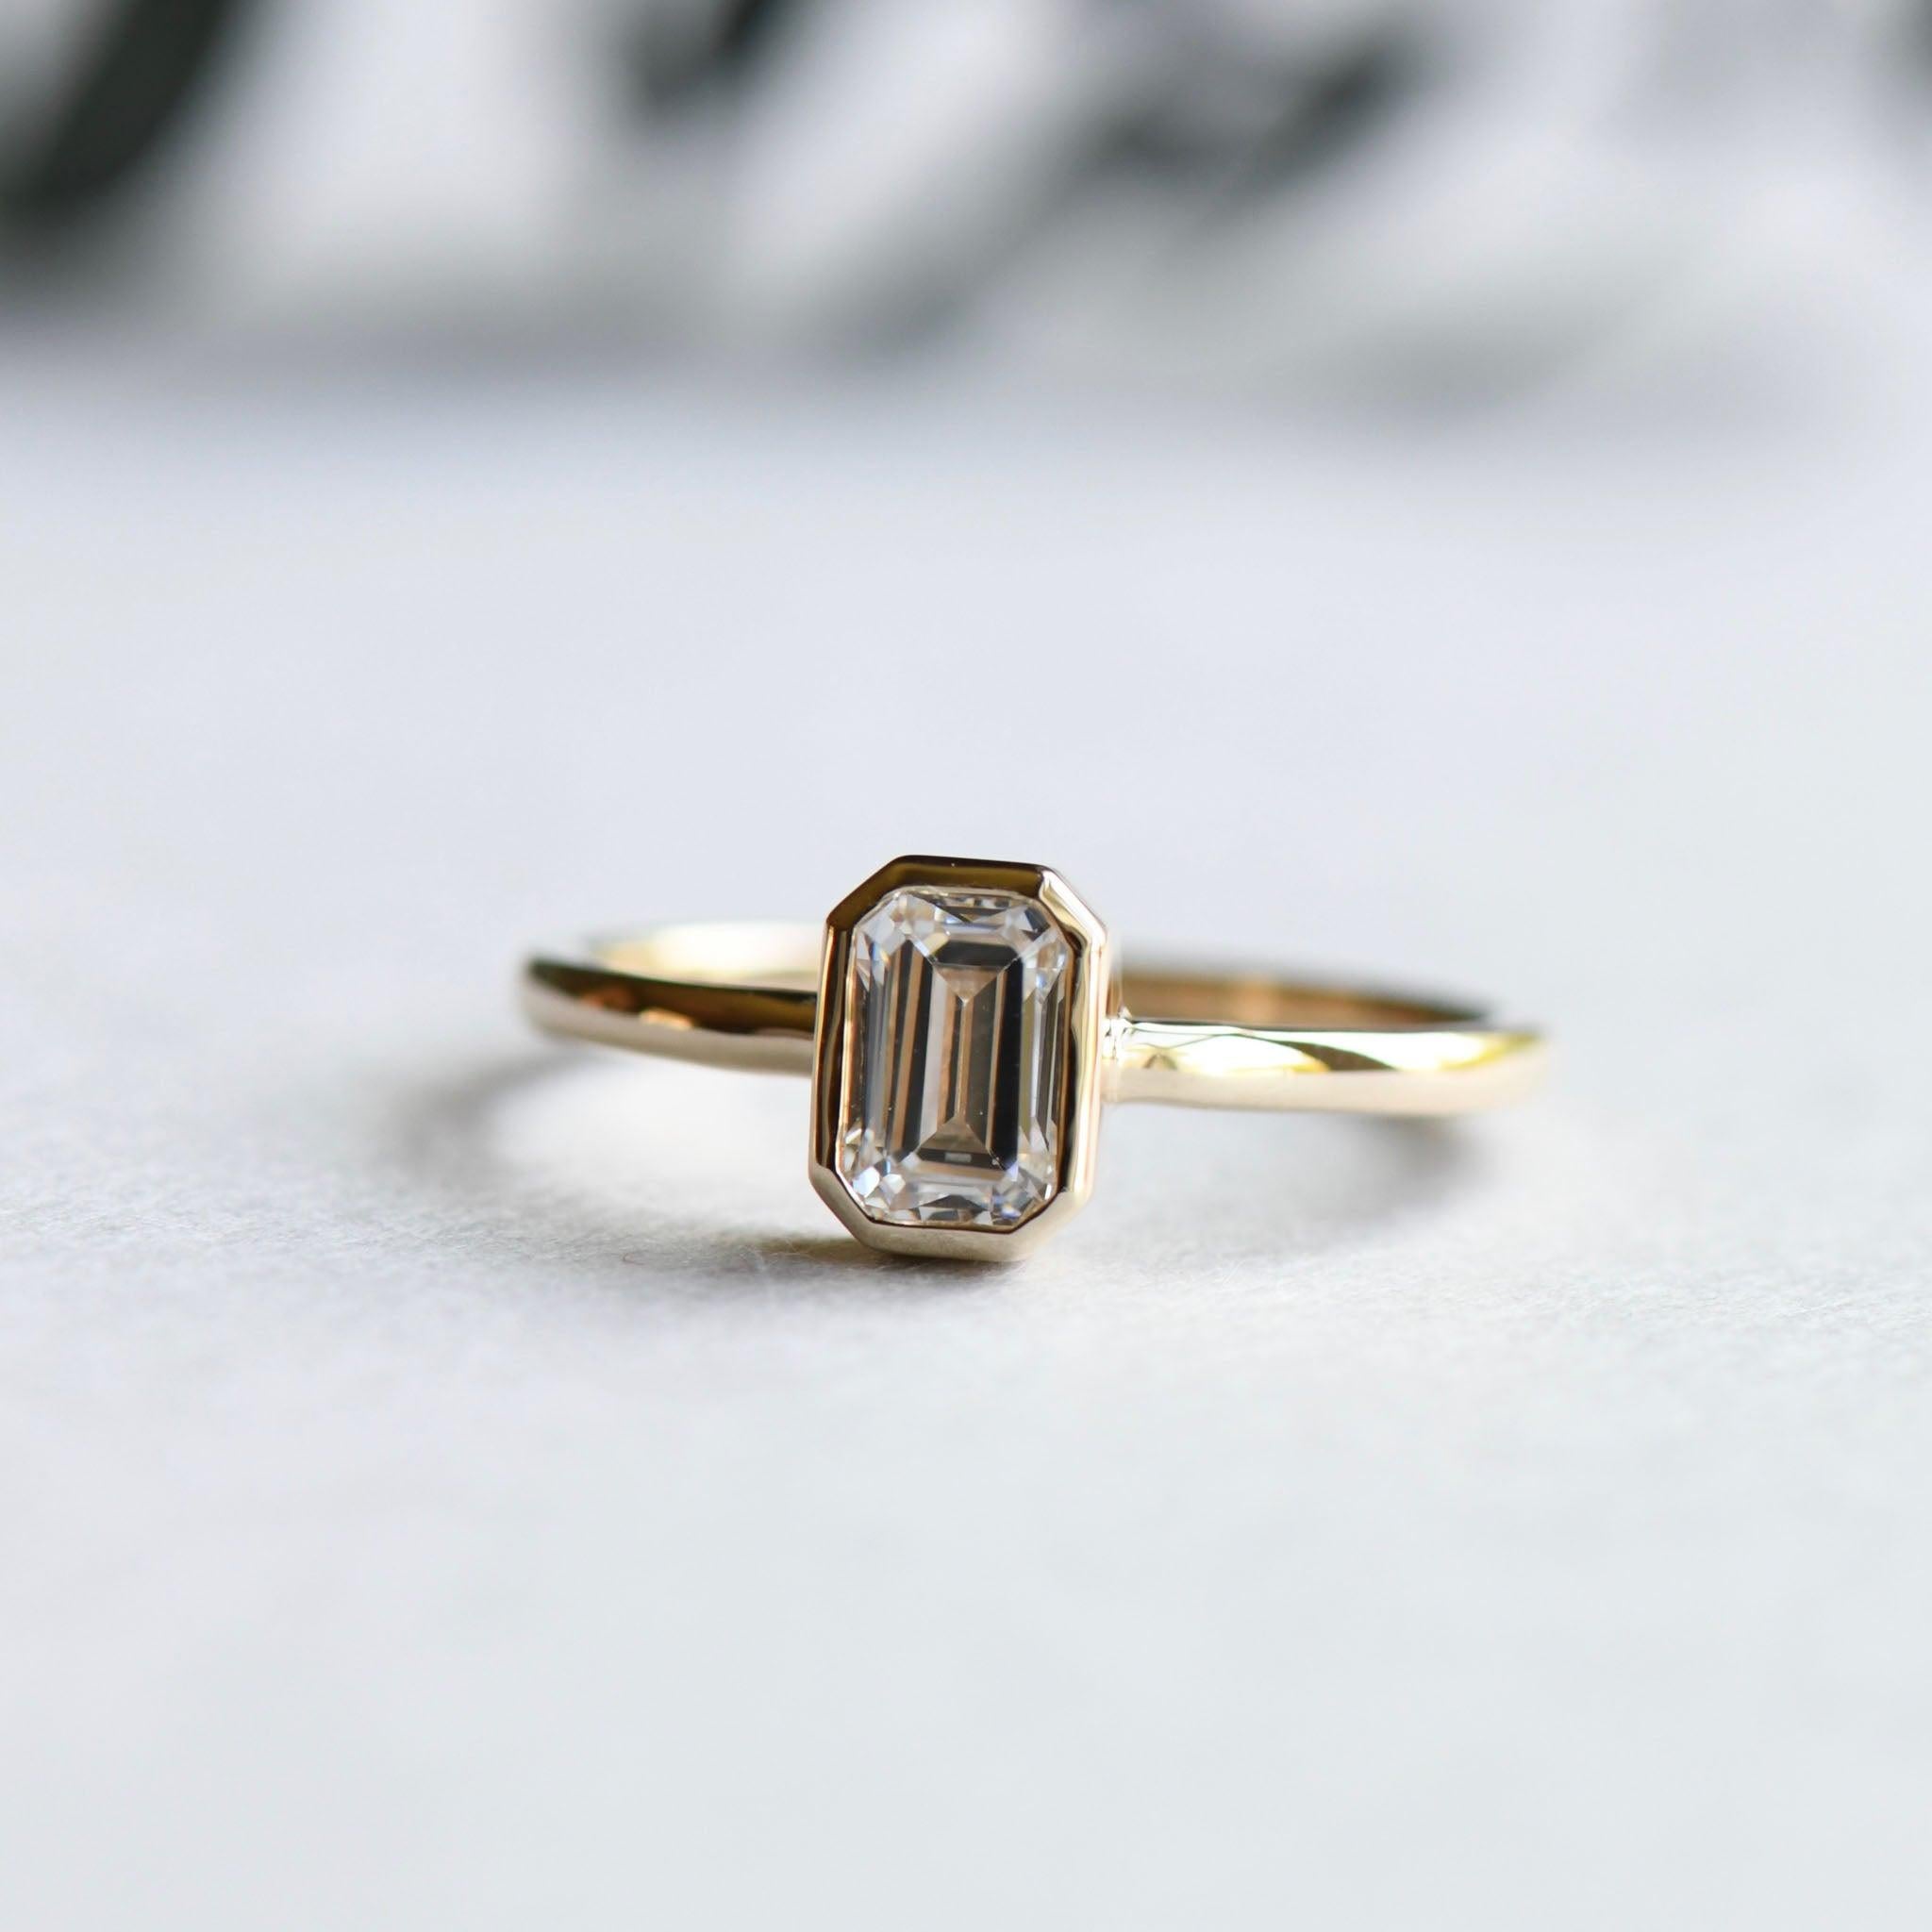 For Sale:  14 Karat Gold with 0.5 Carat Emerald Cut Diamond Solitaire Ring, Engagement Ring 5